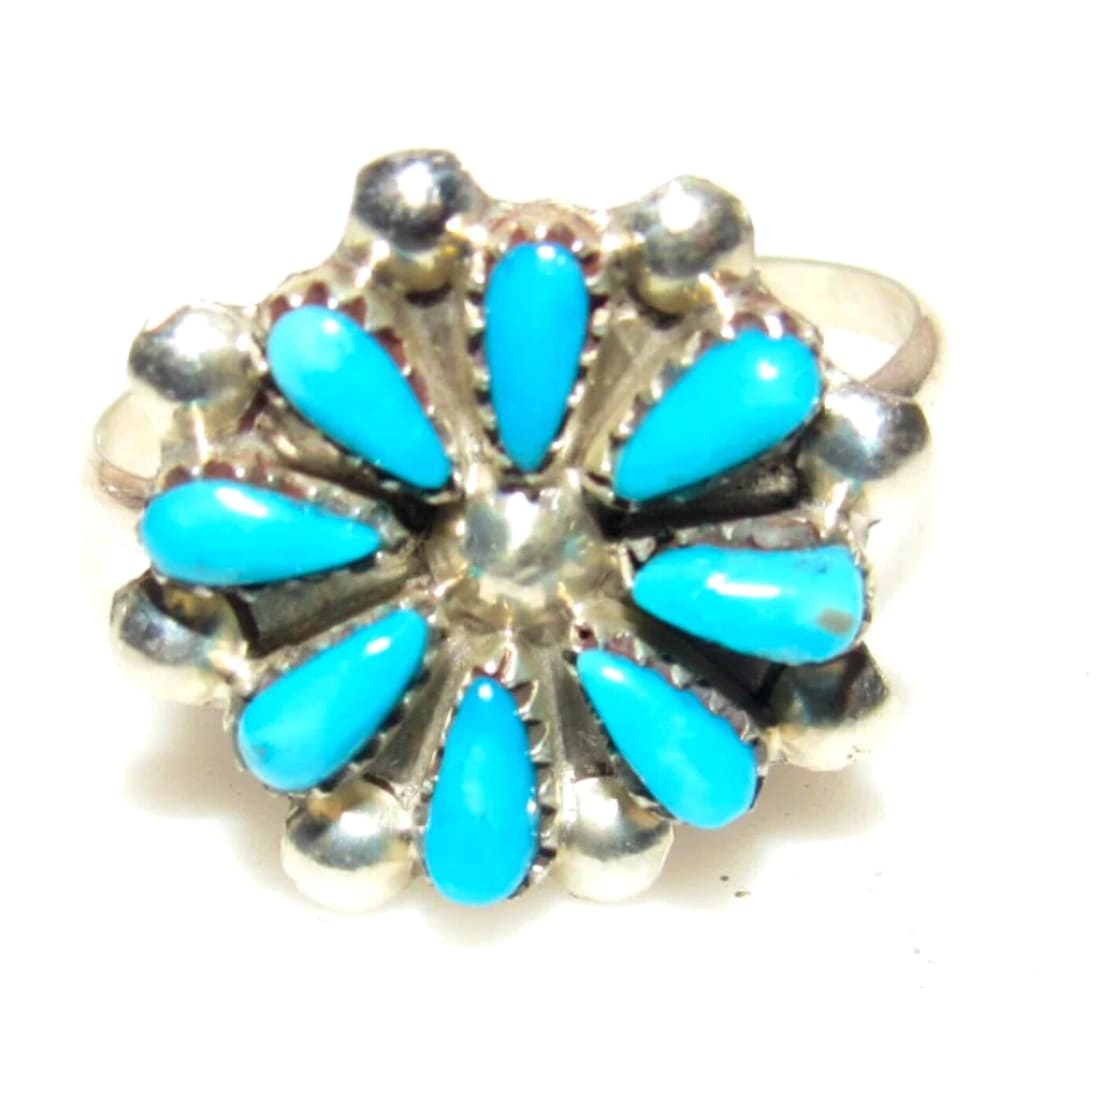 Zuni Sterling Silver Turquoise Cluster Ring by Dave Leekity